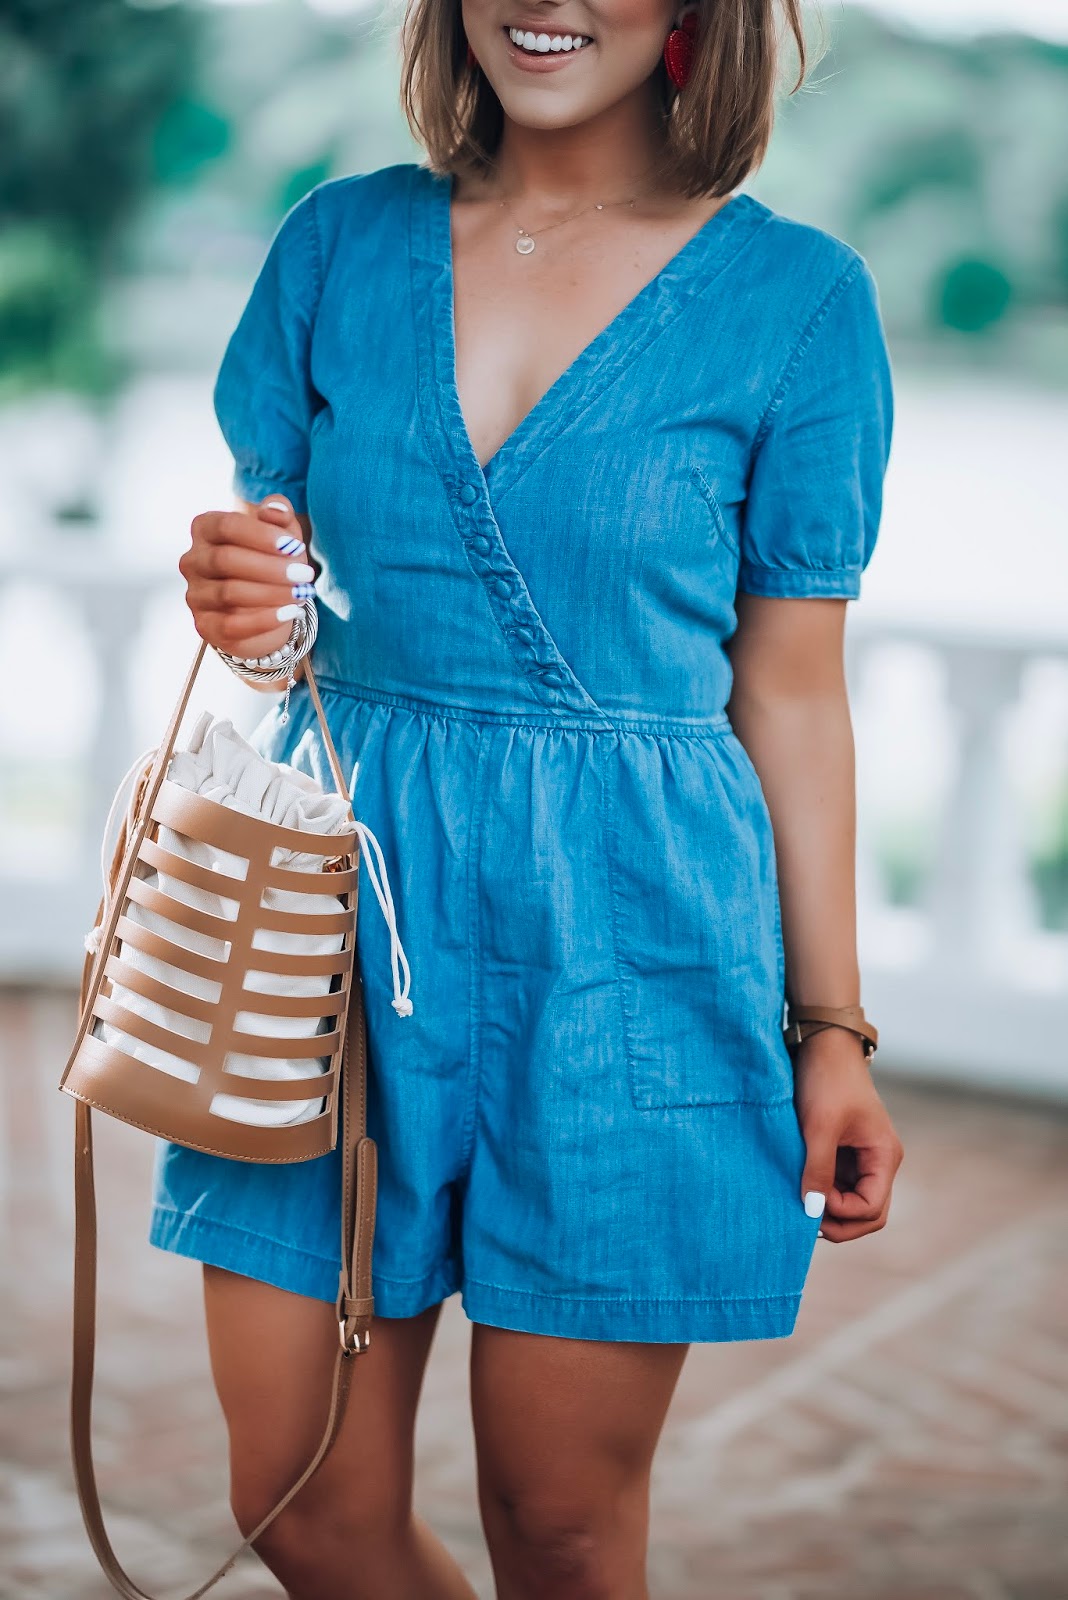 The Best Way to Wear Chambray: Madewell Chambray Button Detail Romper Paired With Red Accessories - Something Delightful Blog